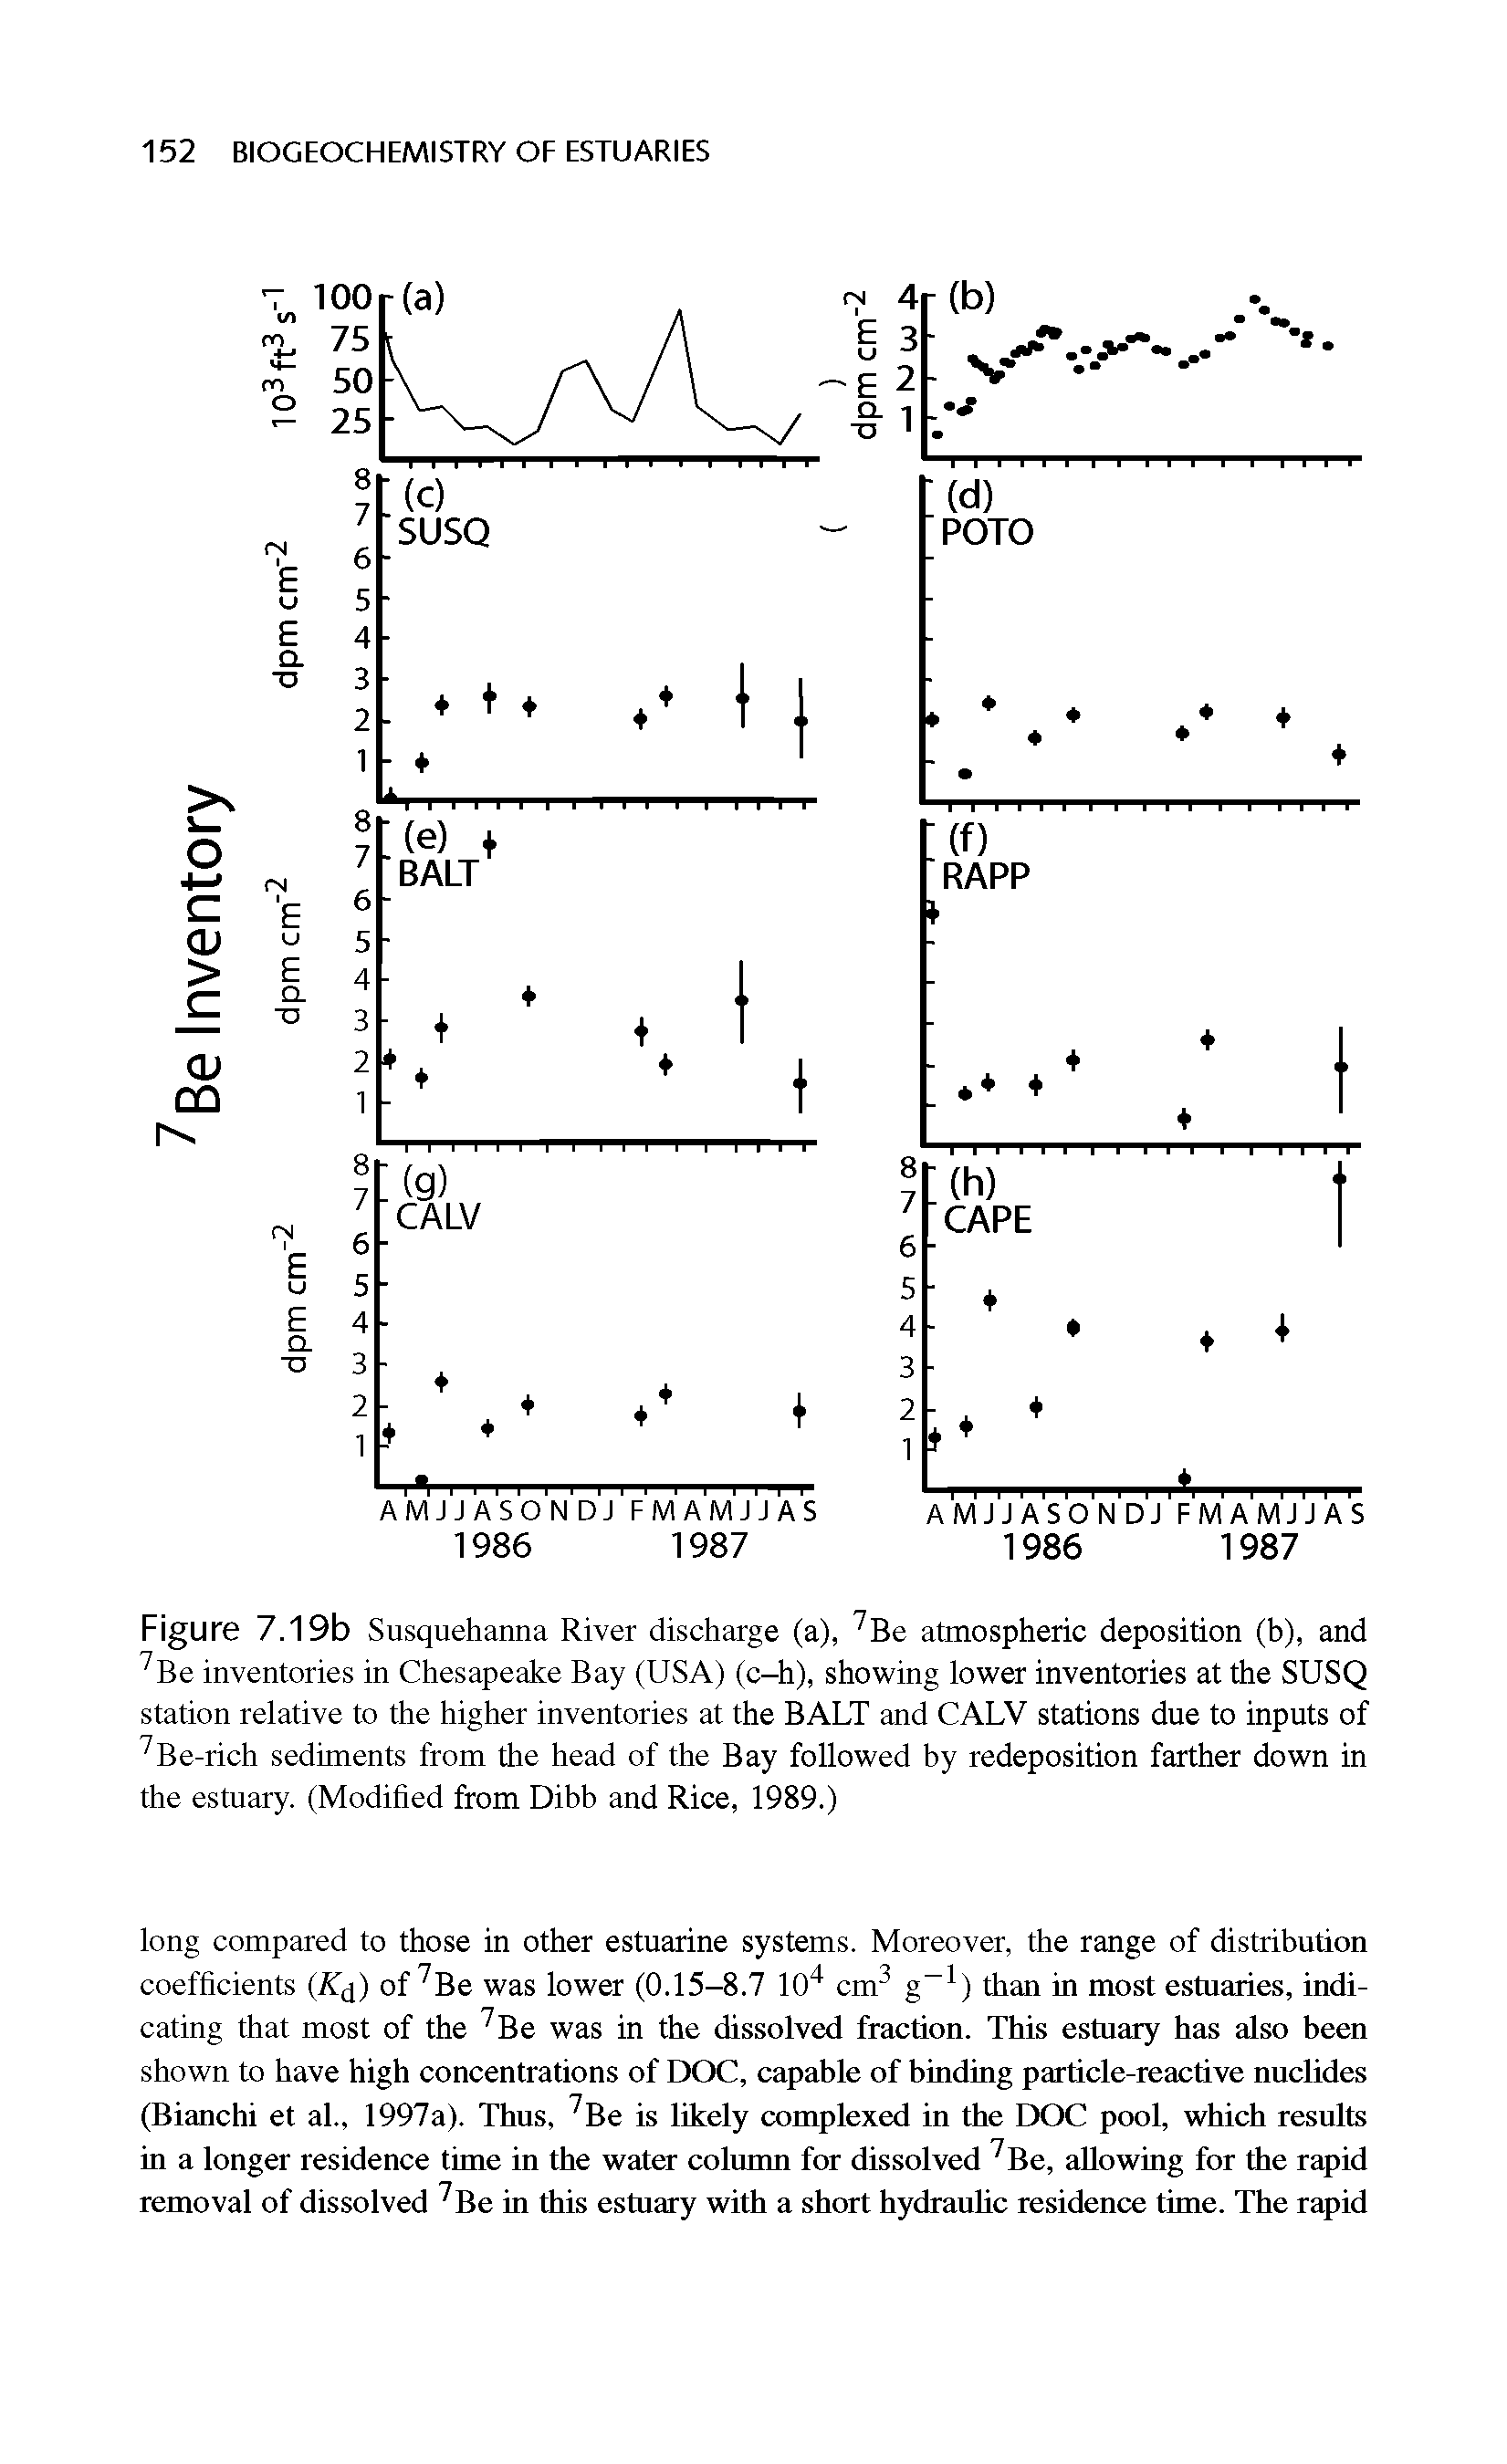 Figure 7.19b Susquehanna River discharge (a), 7Be atmospheric deposition (b), and 7Be inventories in Chesapeake Bay (USA) (c-h), showing lower inventories at the SUSQ station relative to the higher inventories at the BALT and CALV stations due to inputs of 7Be-rich sediments from the head of the Bay followed by redeposition farther down in the estuary. (Modified from Dibb and Rice, 1989.)...